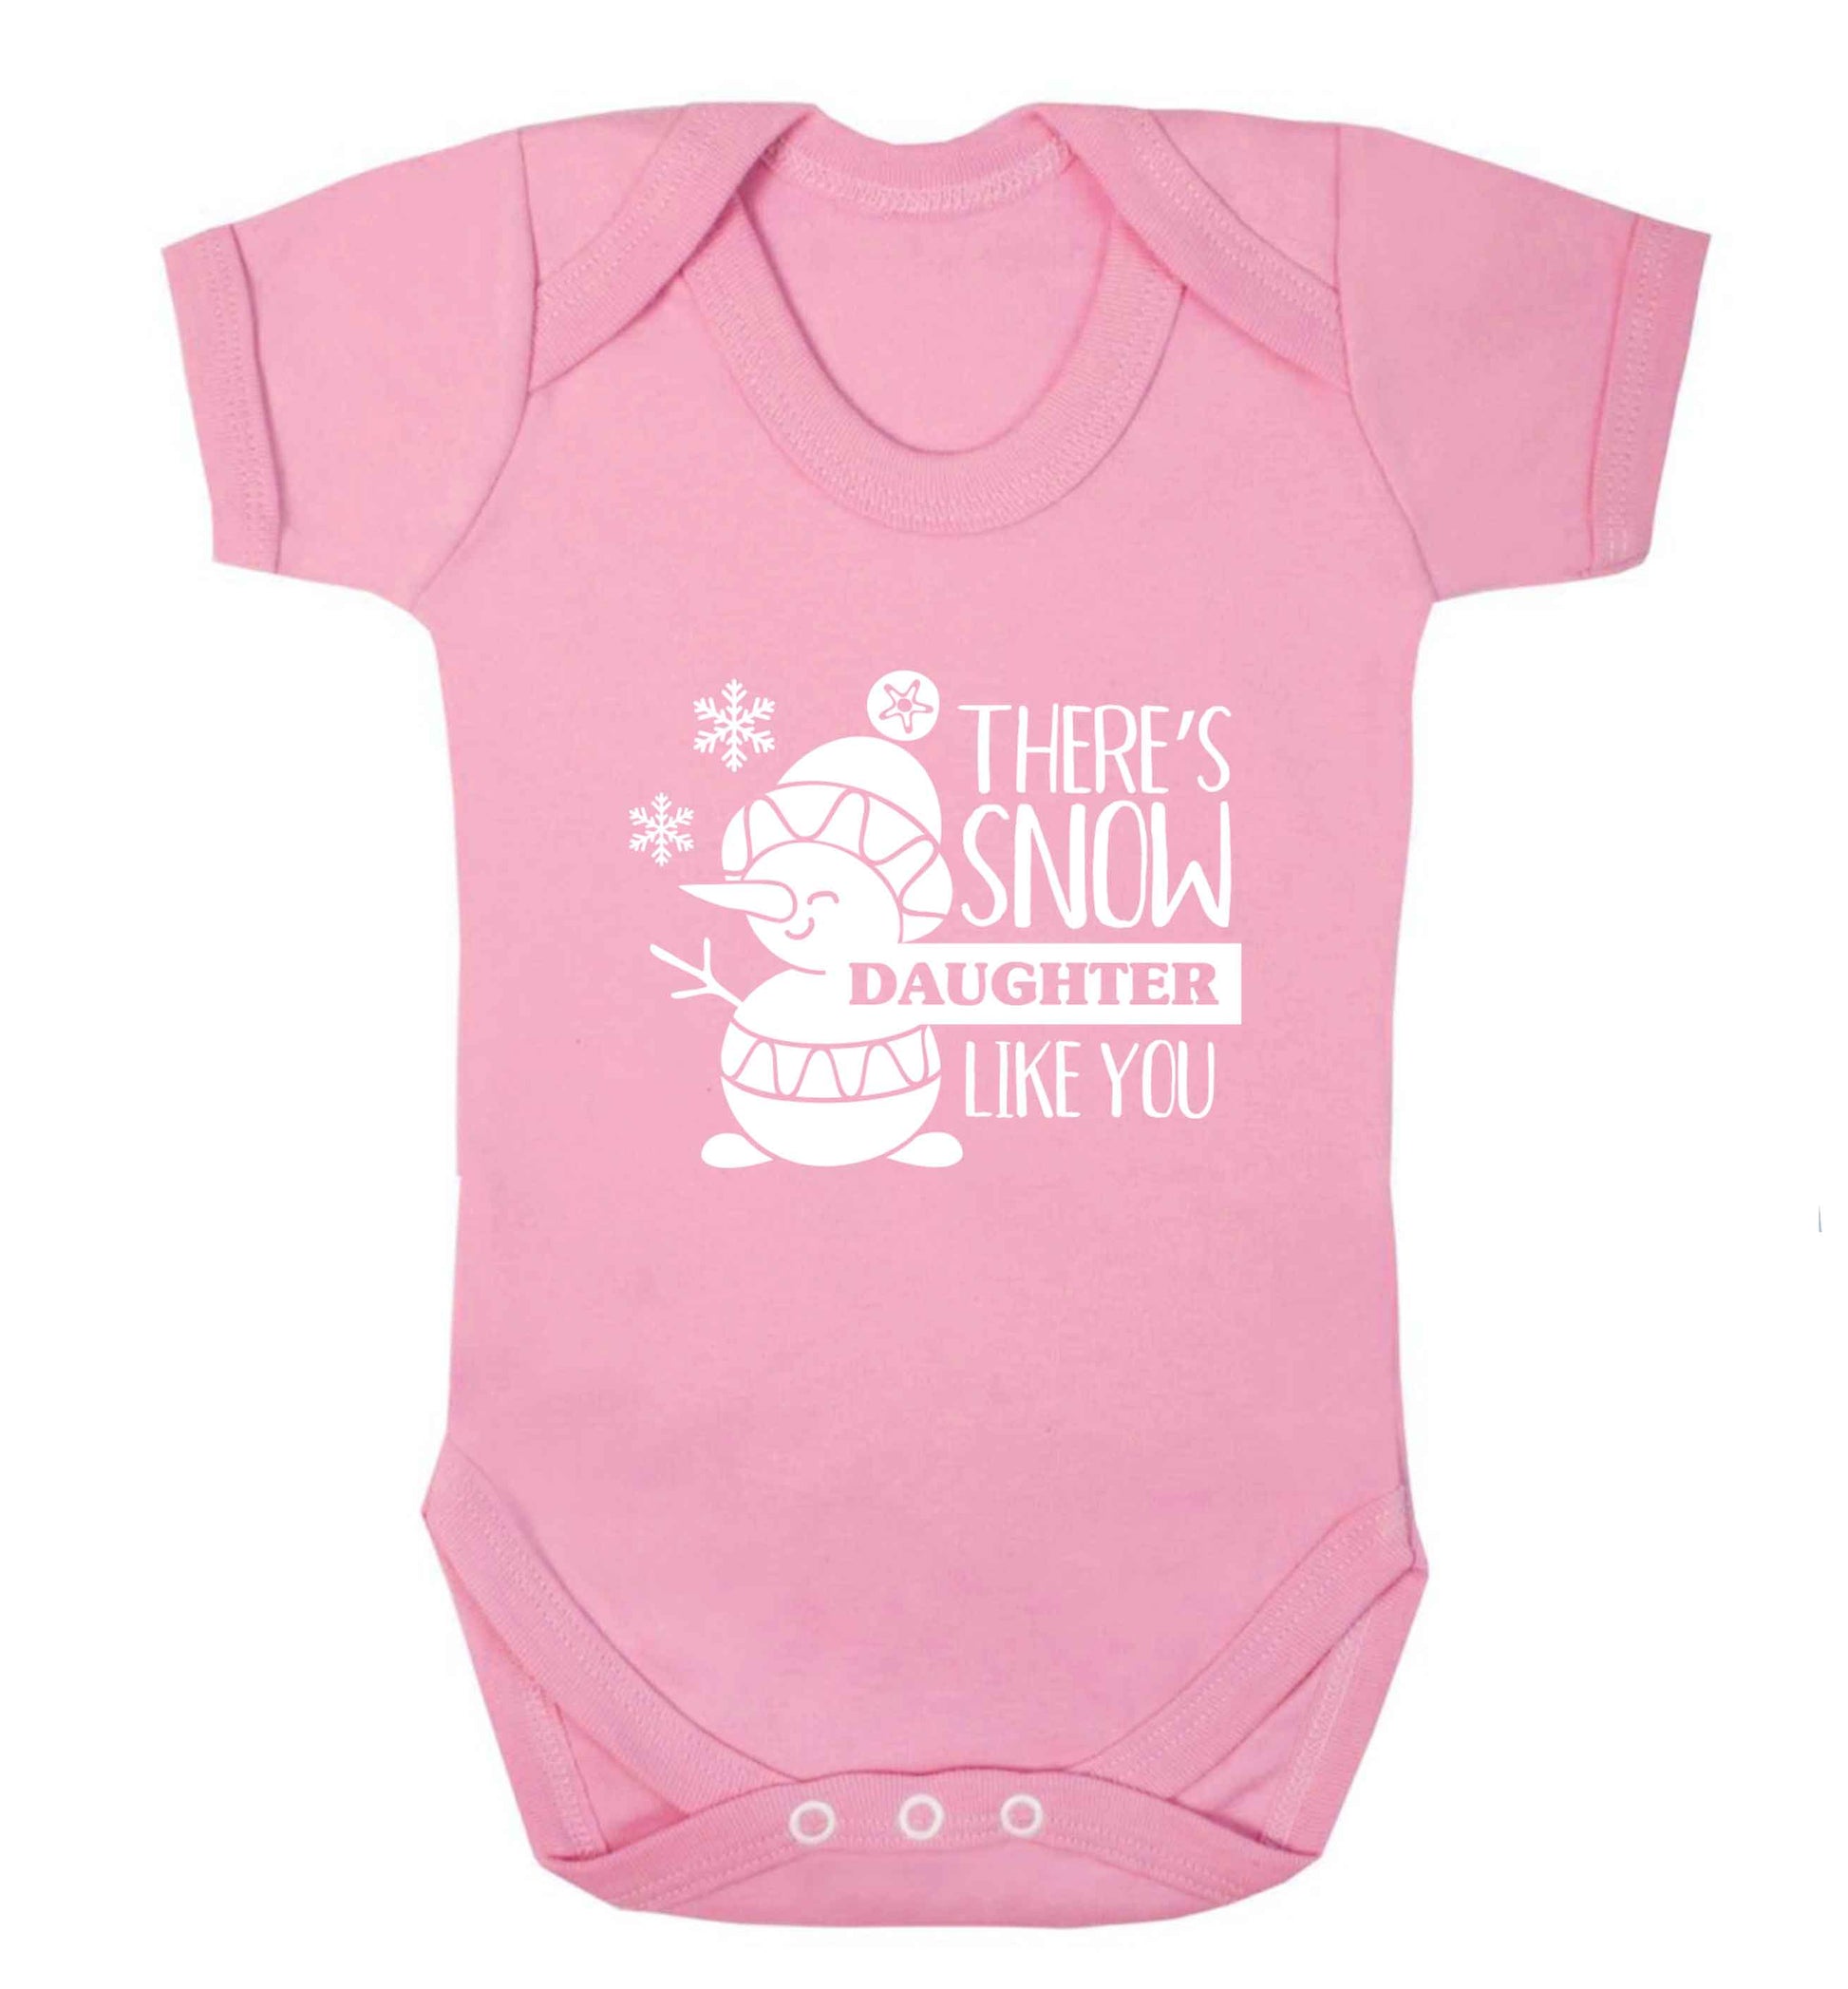 There's snow daughter like you baby vest pale pink 18-24 months